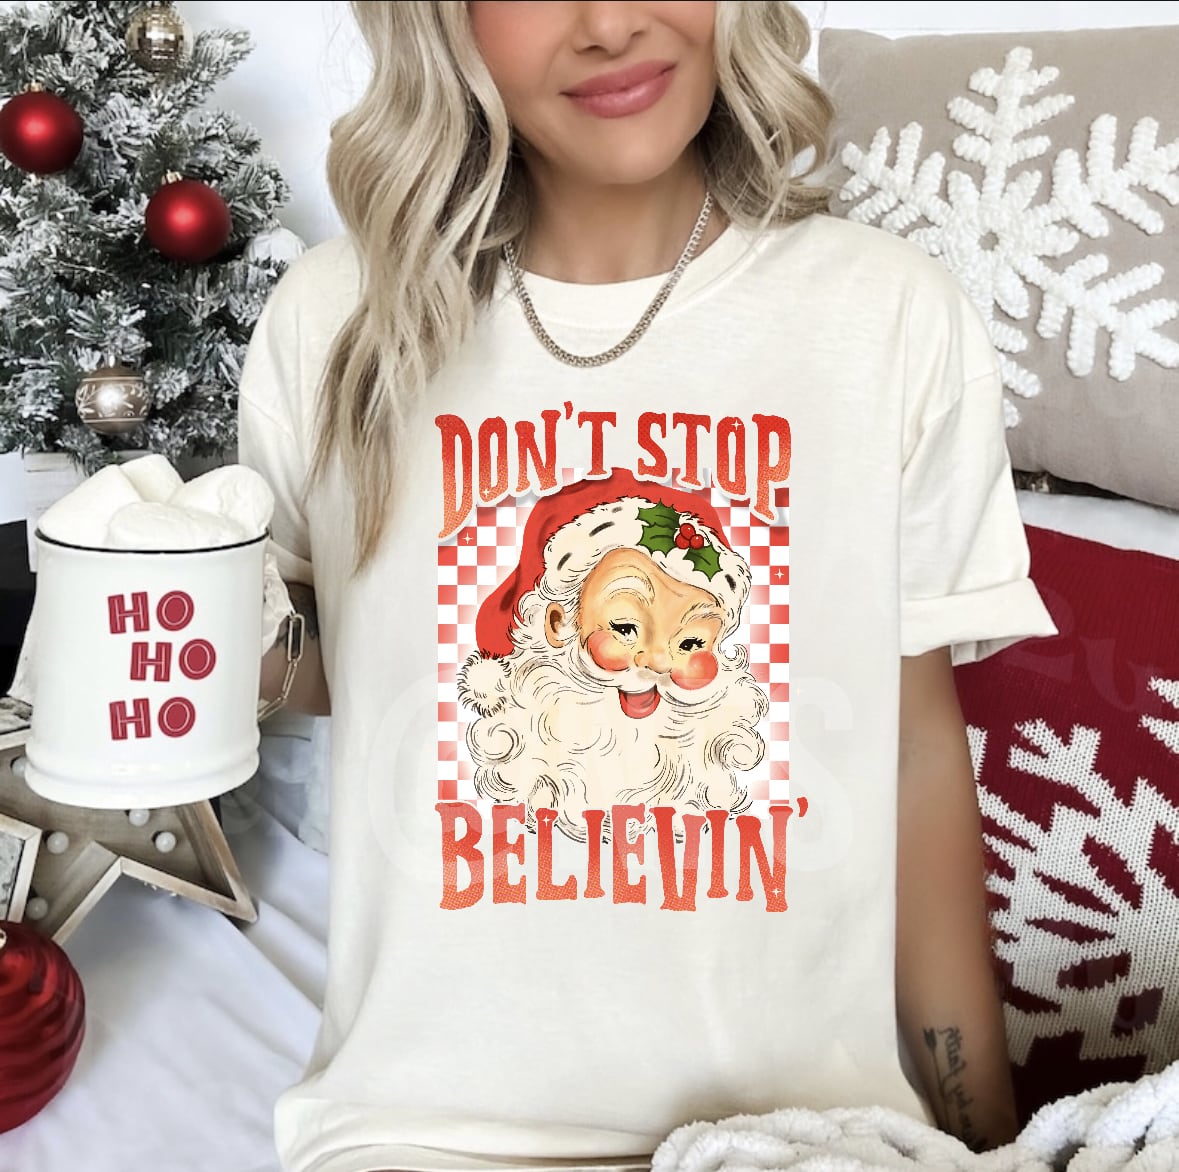 Christmas Graphic Tee- Believe Santa in Red - Show Off Your Festive Spirit in Style!